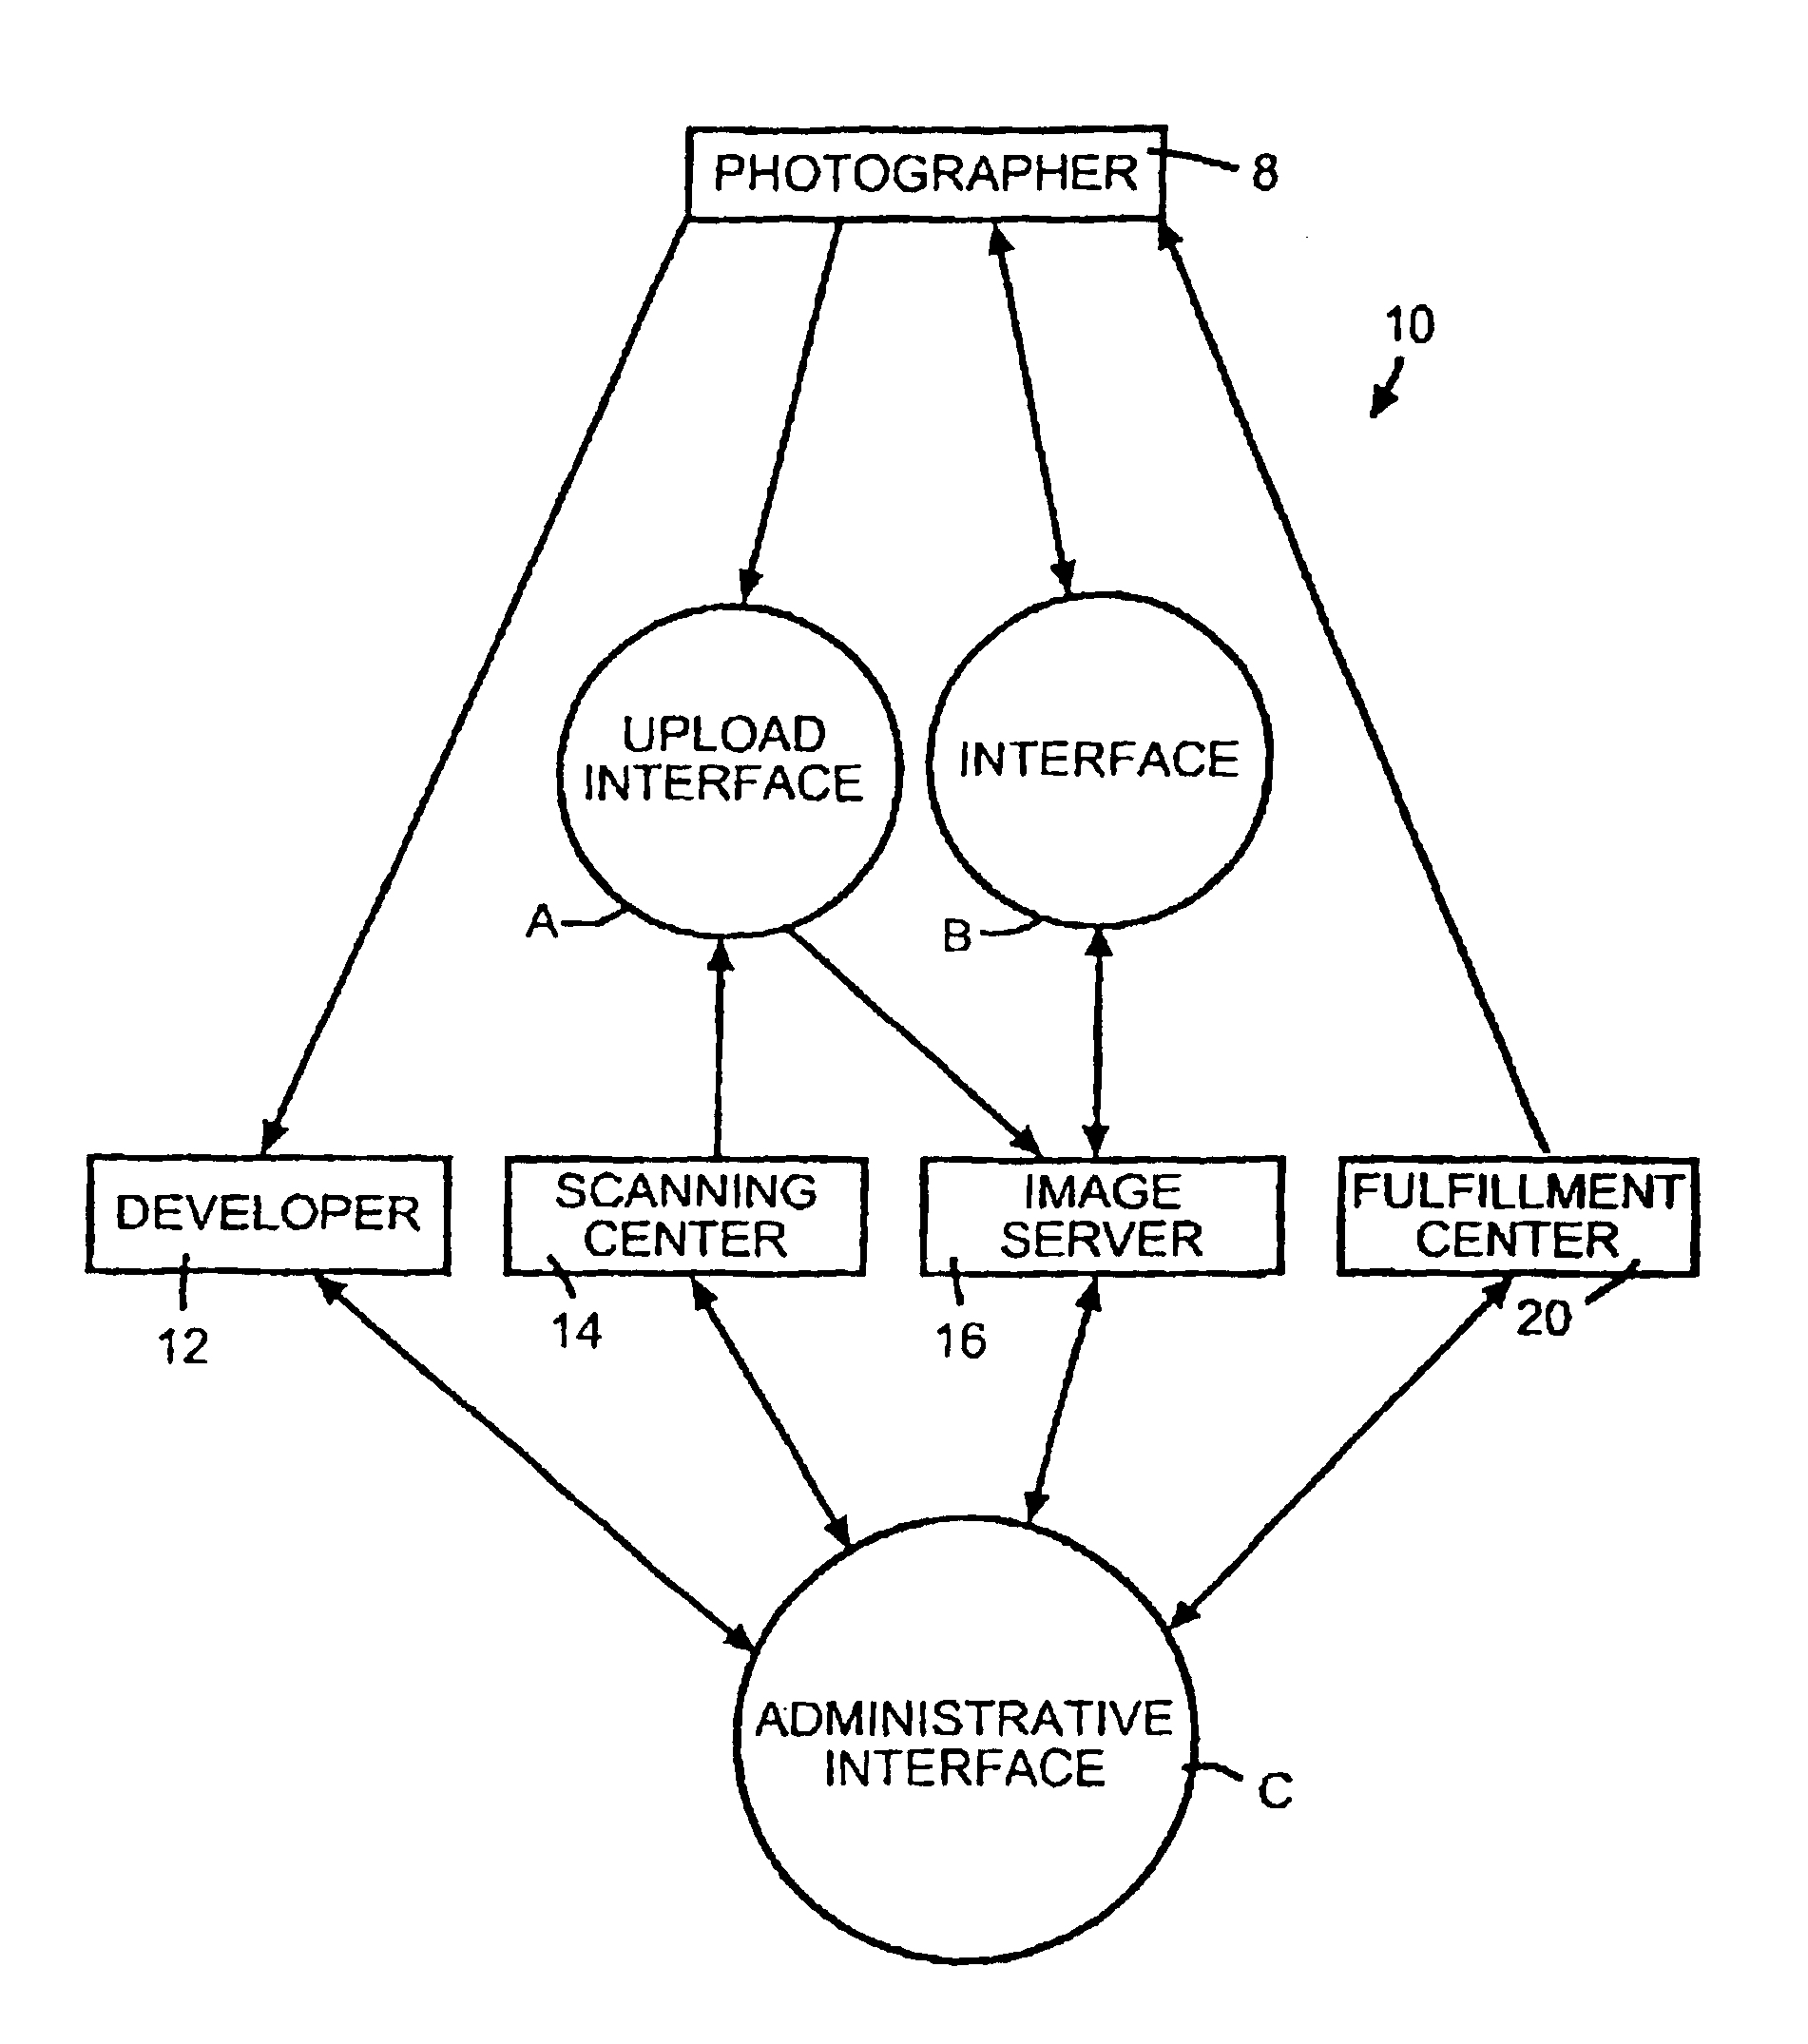 Method of processing a roll of exposed photographic film containing photographic images into corresponding digital images and then distributing visual prints produced from the digital images